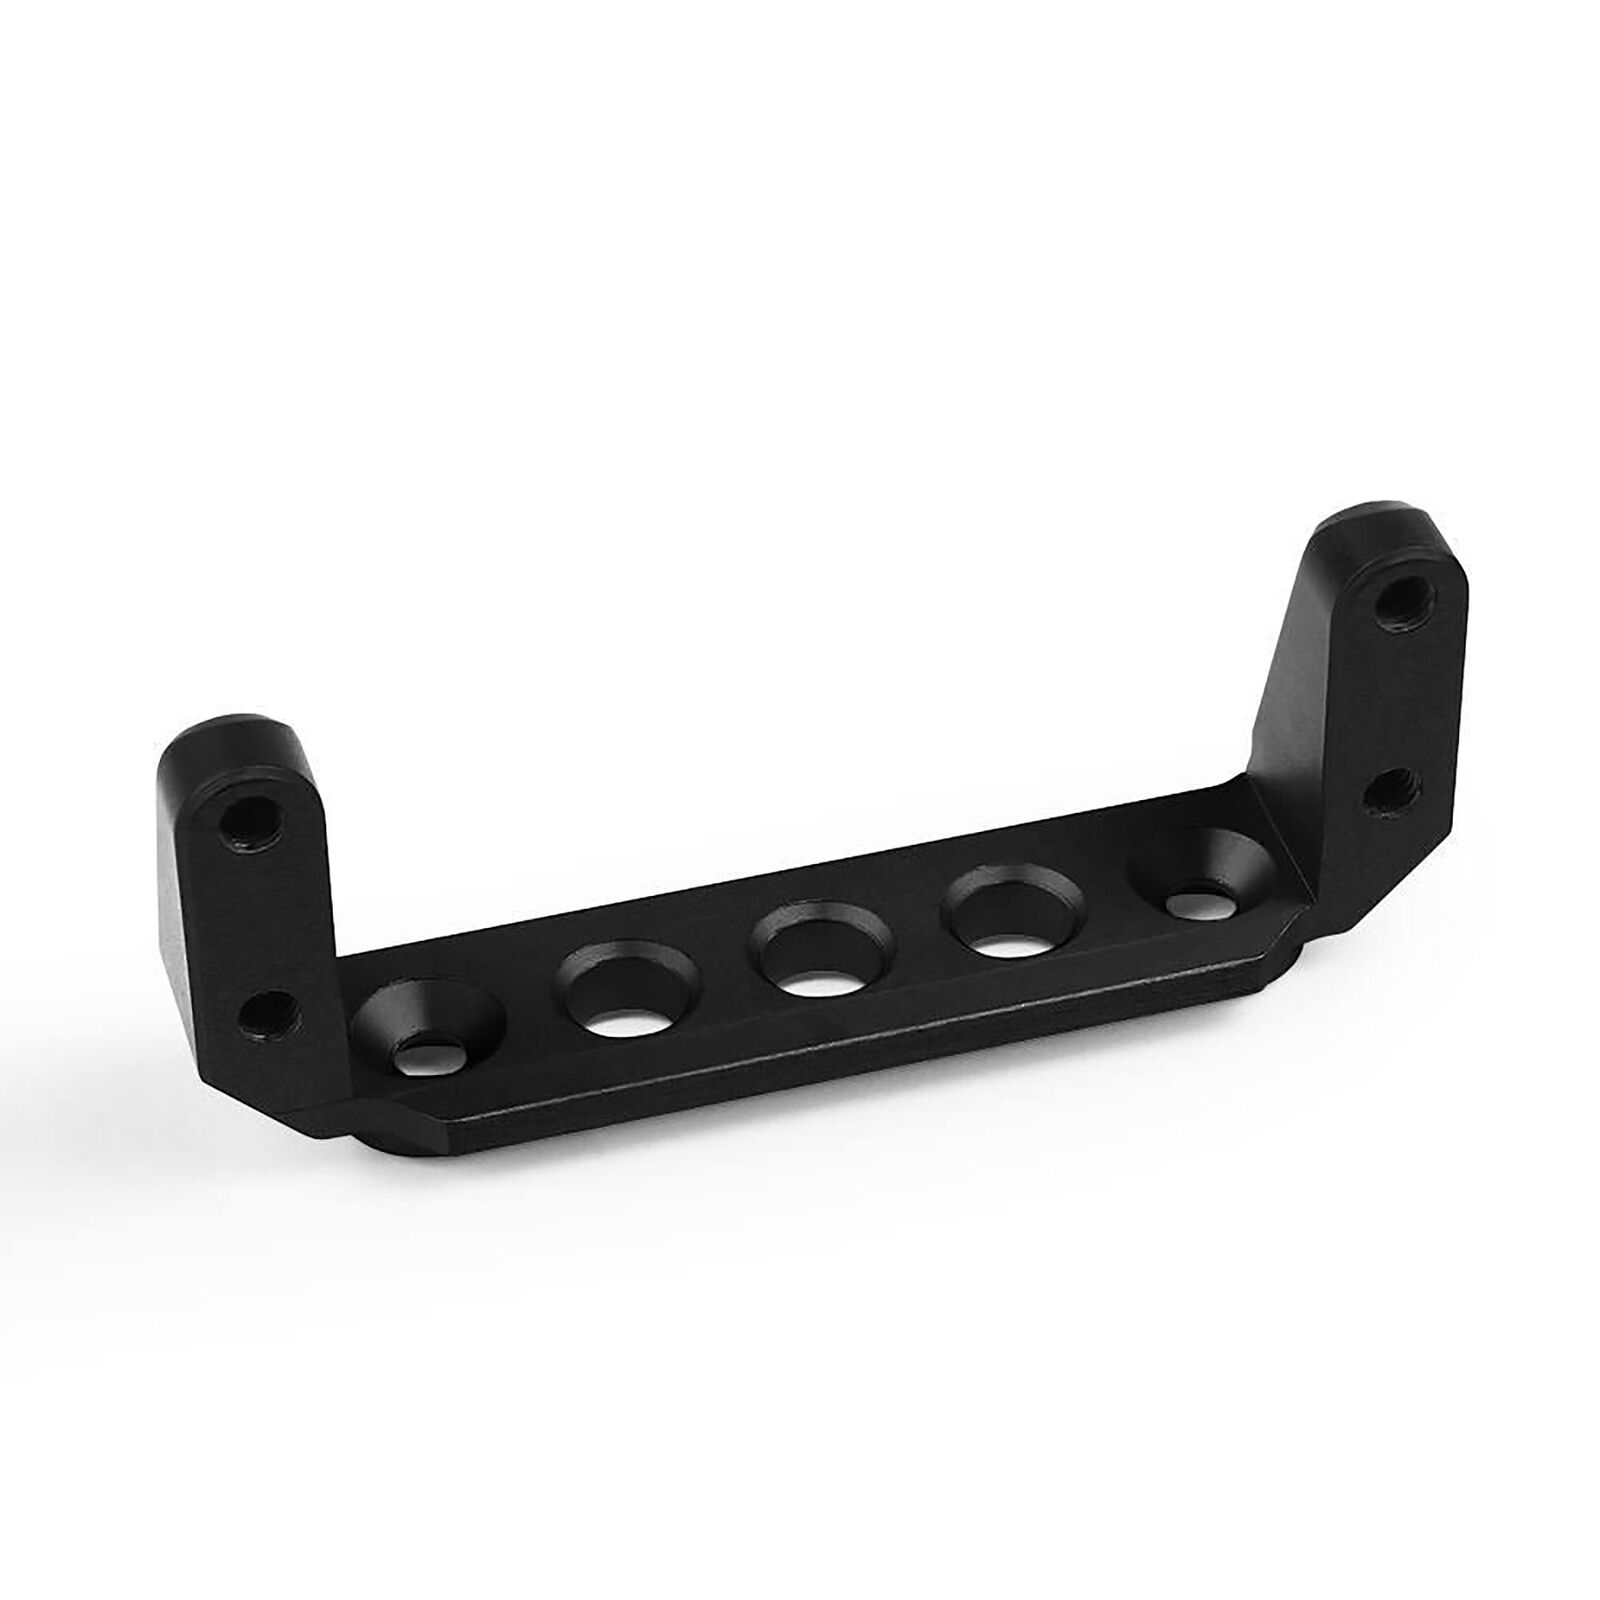 Vanquish Products Axle Servo Mount, Black Anodized: AR60 | Tower Hobbies